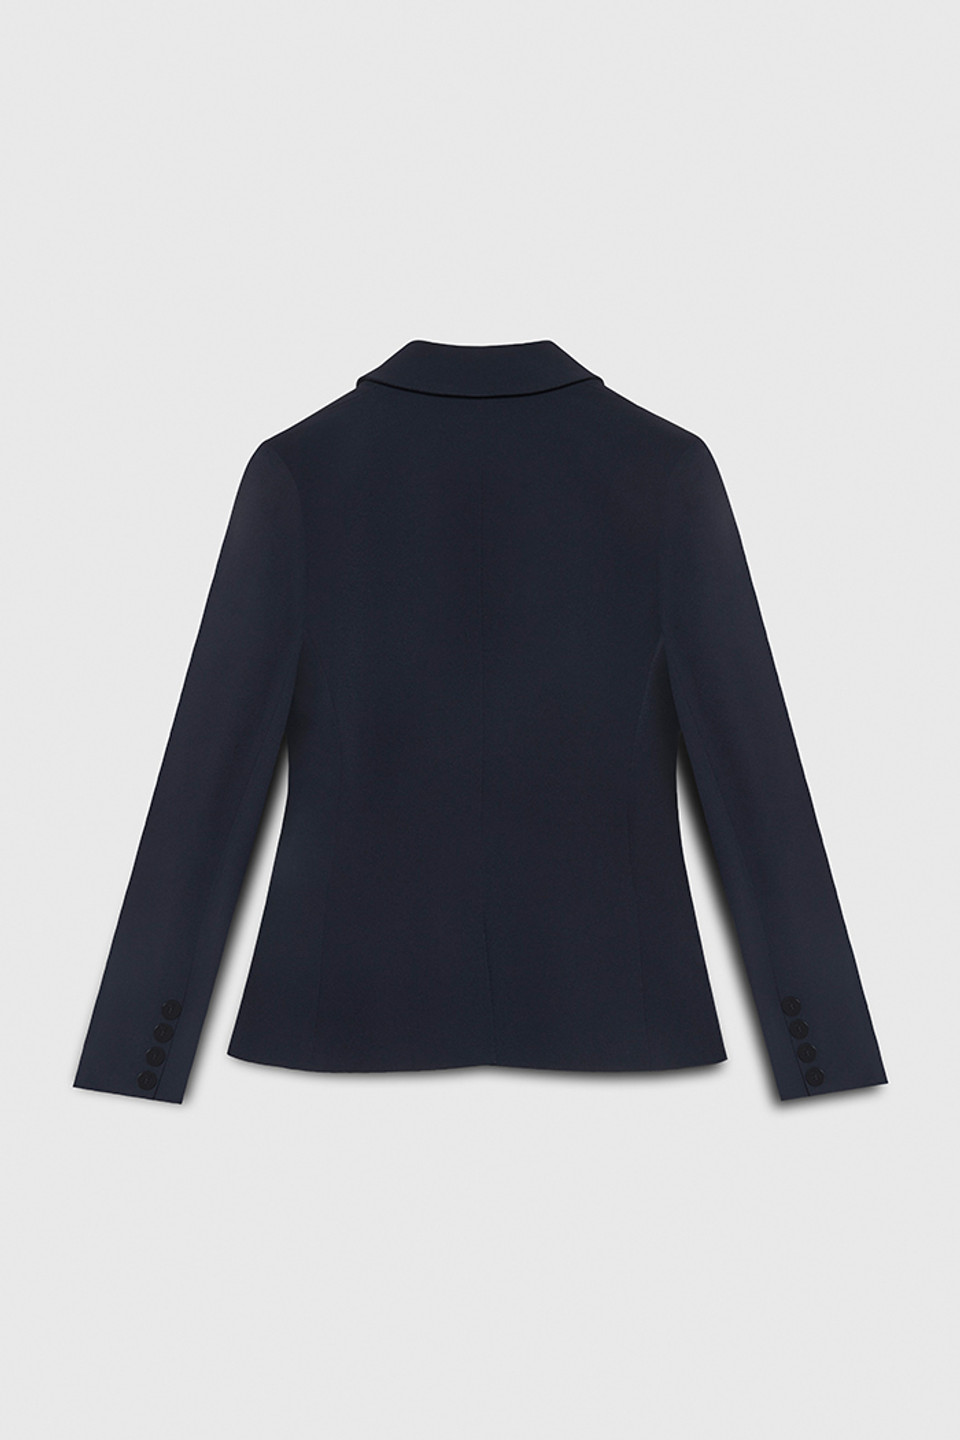 Clever Crepe Claverton Jacket Navy - Welcome to the Fold LTD